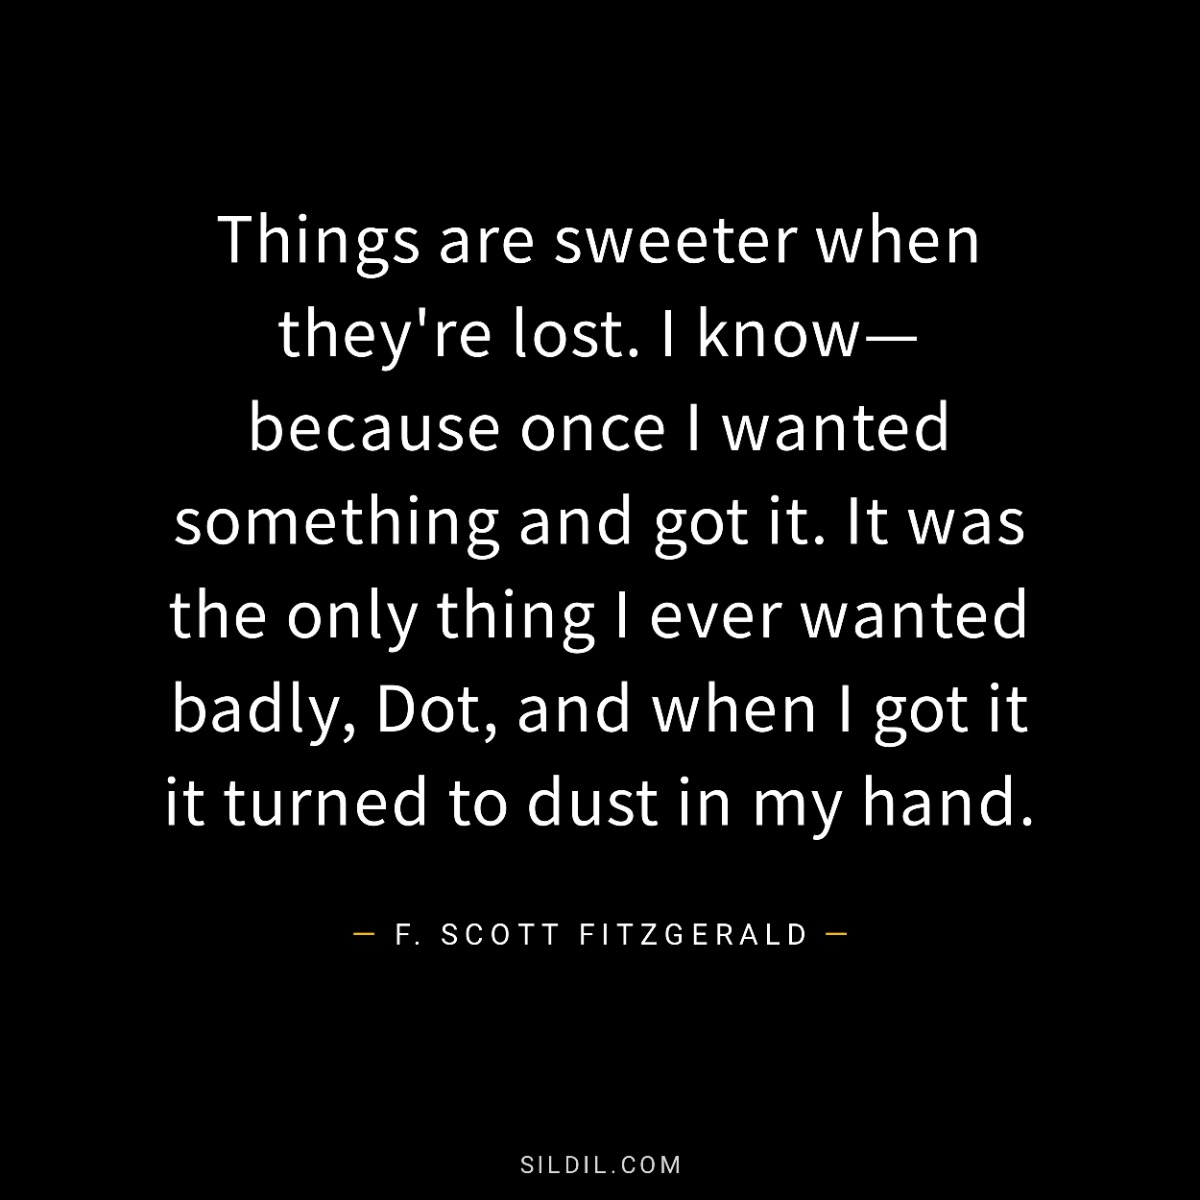 Things are sweeter when they're lost. I know—because once I wanted something and got it. It was the only thing I ever wanted badly, Dot, and when I got it it turned to dust in my hand.